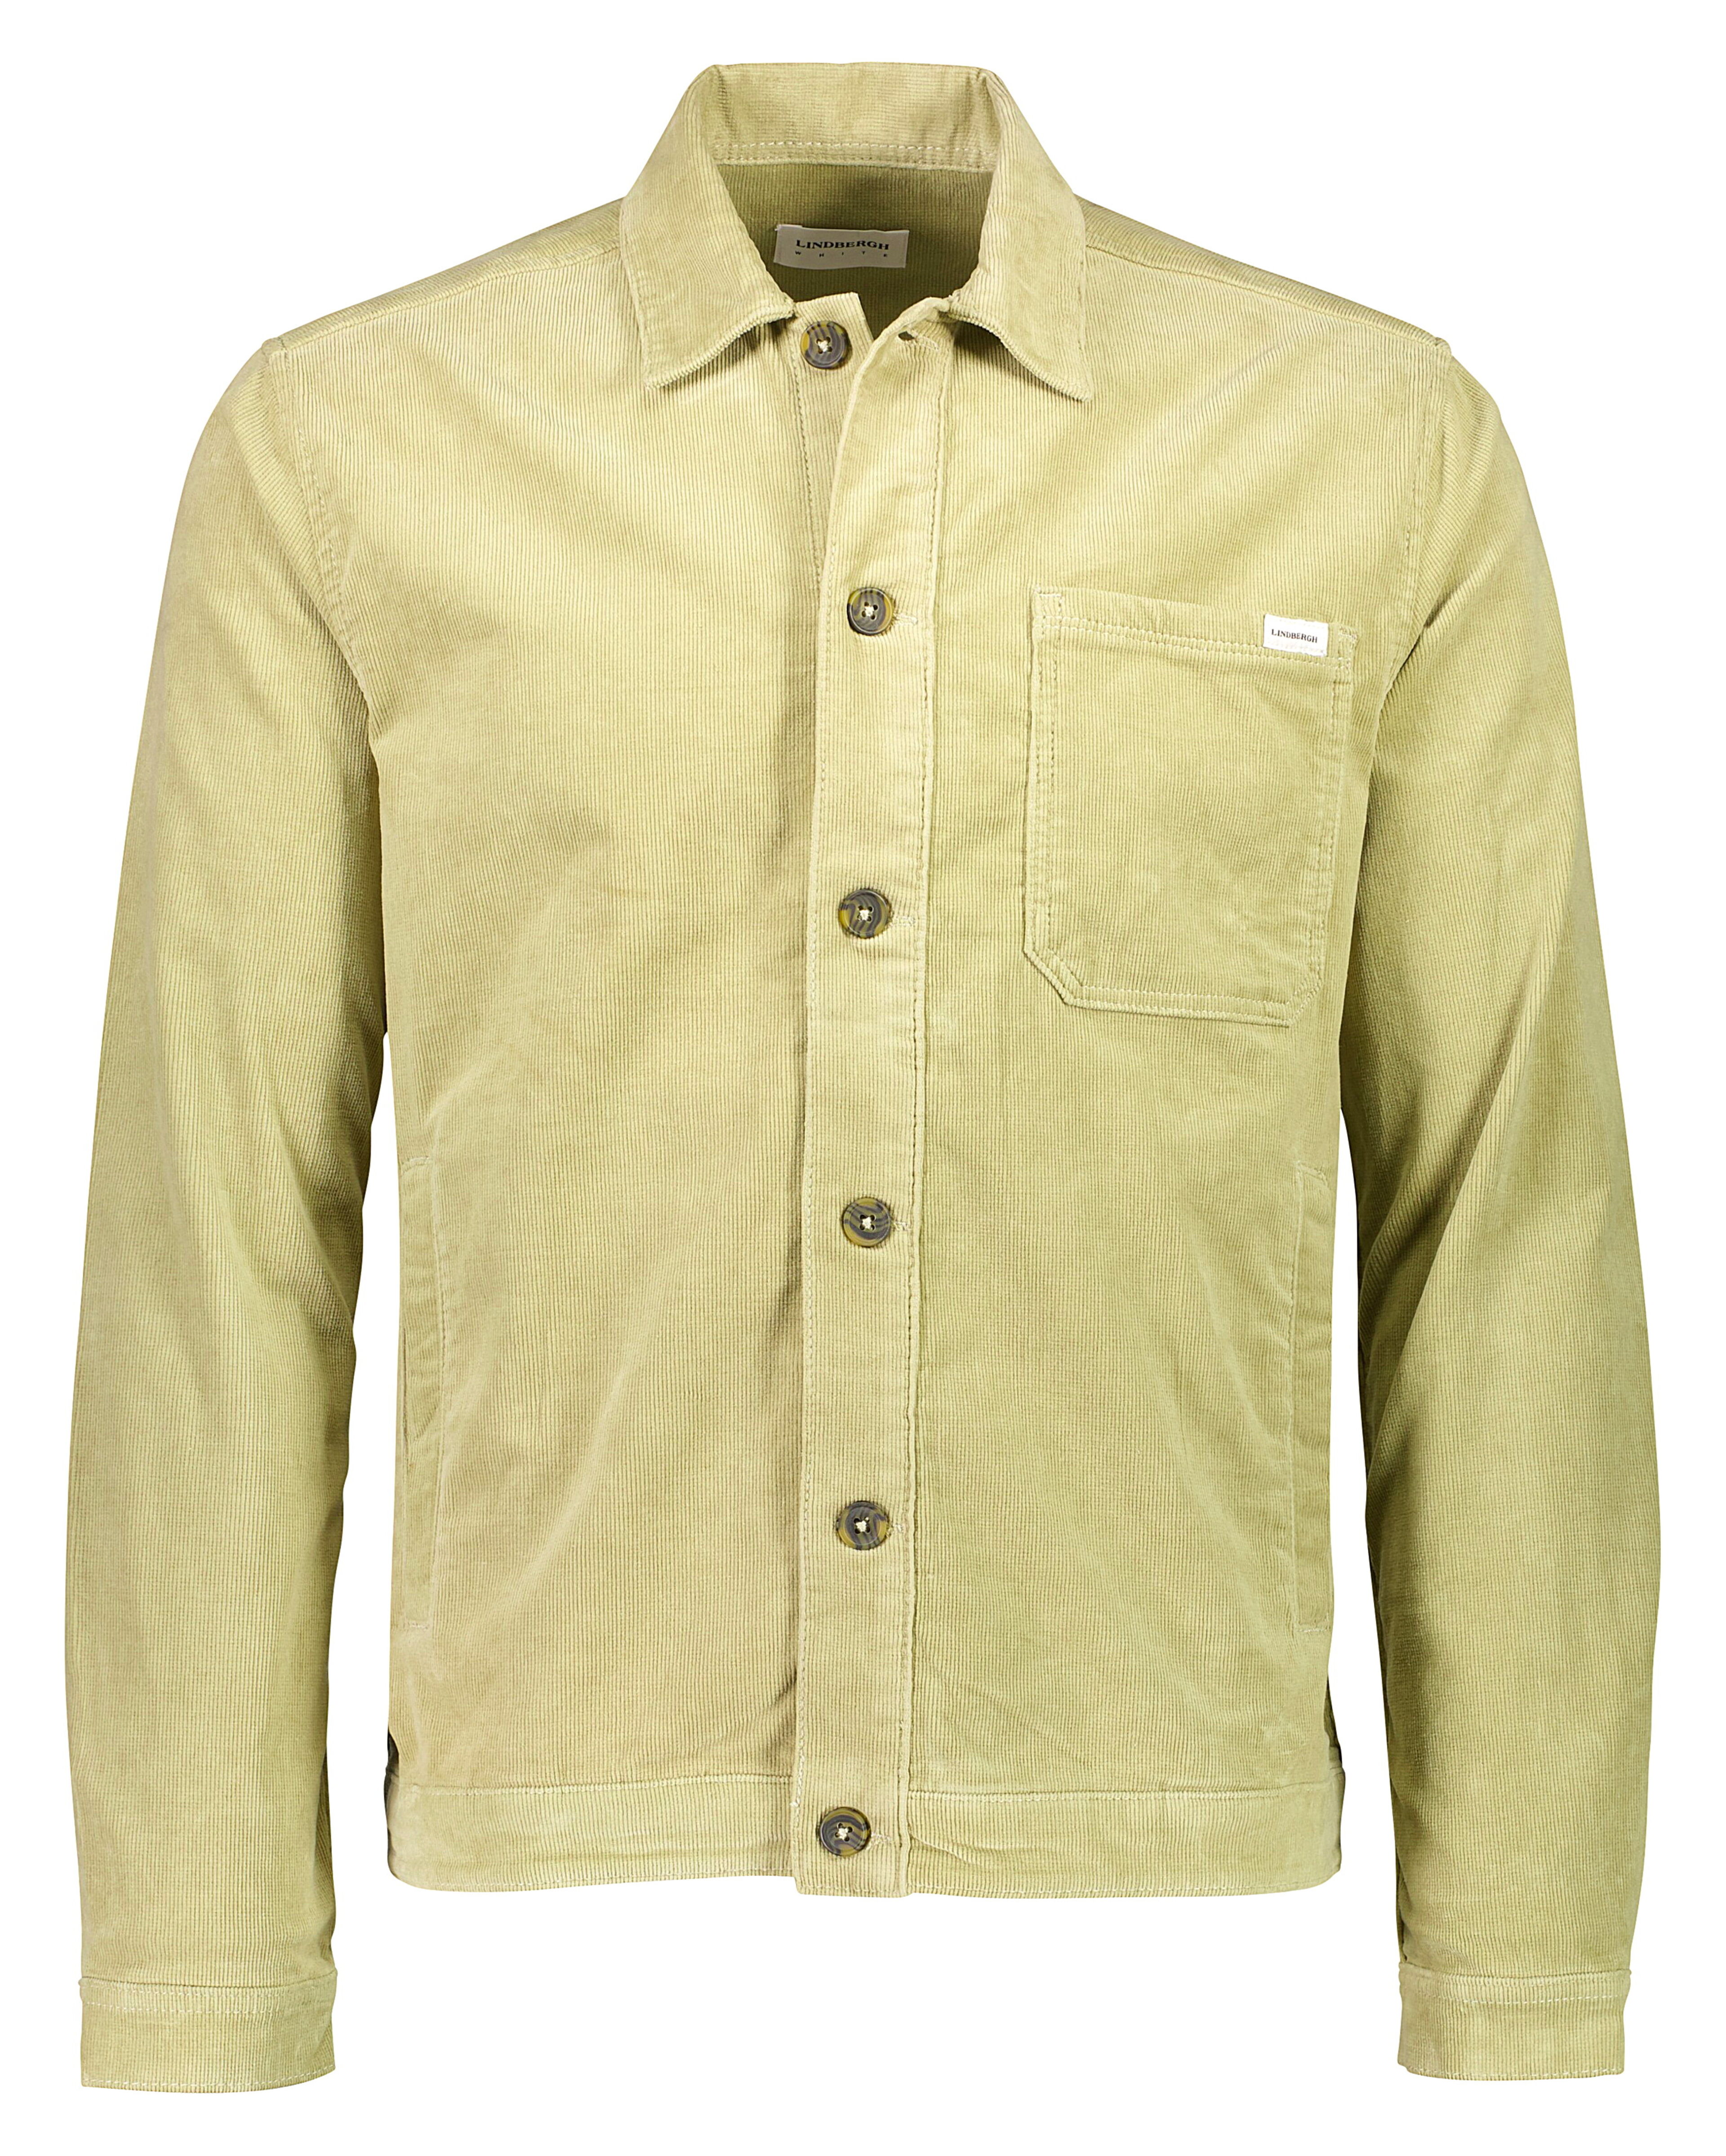 Overshirt | Relaxed fit 30-306072